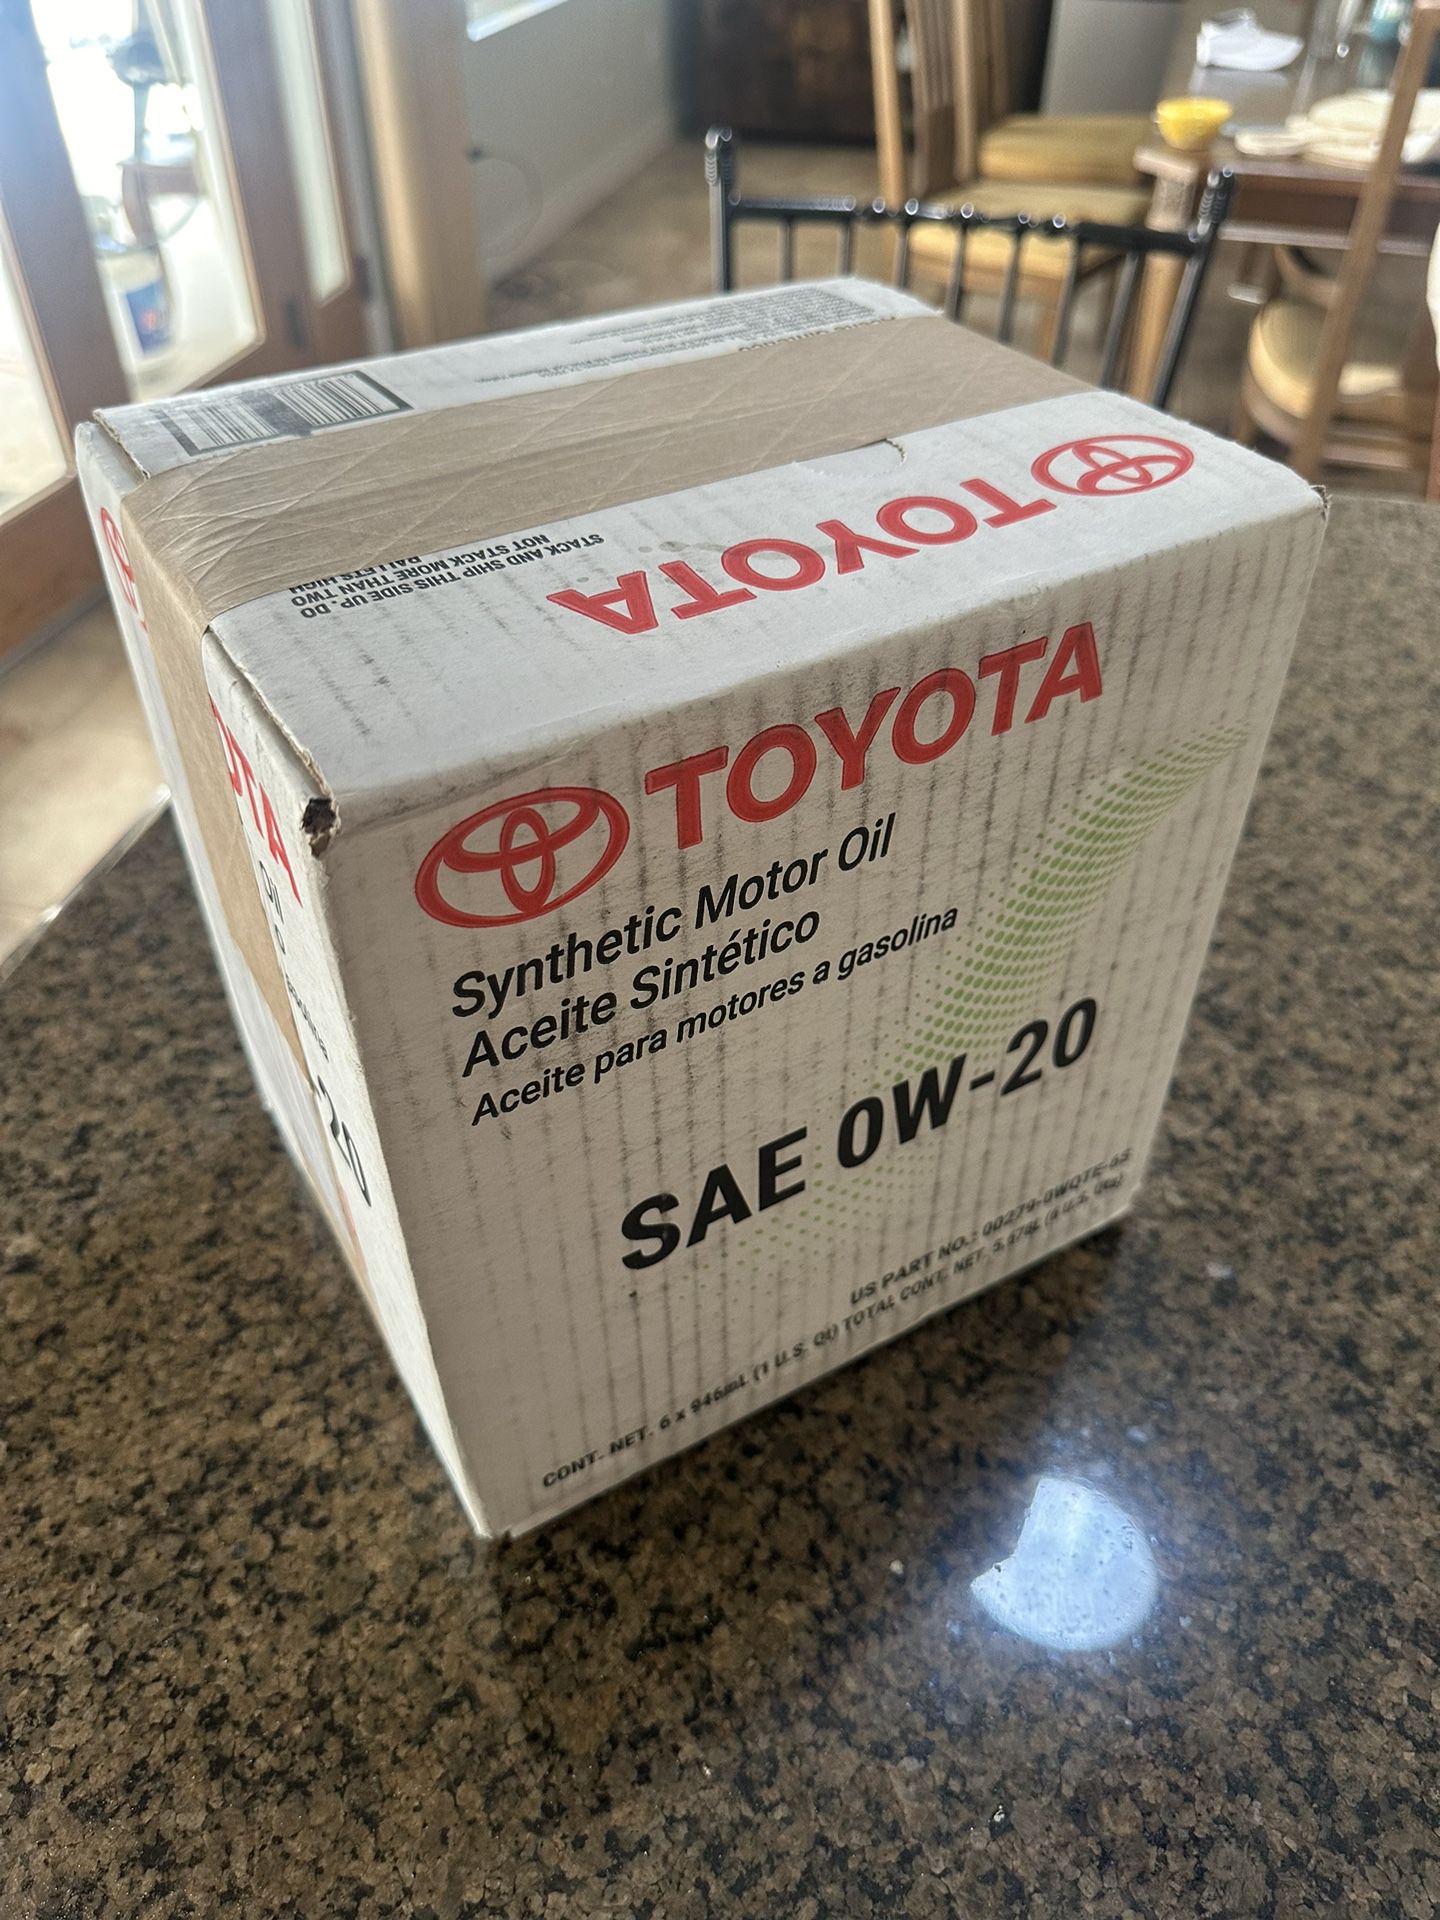 New Toyota Genuine 0W-20 Synthetic Motor Oil, 6 Qts (Factory Sealed)